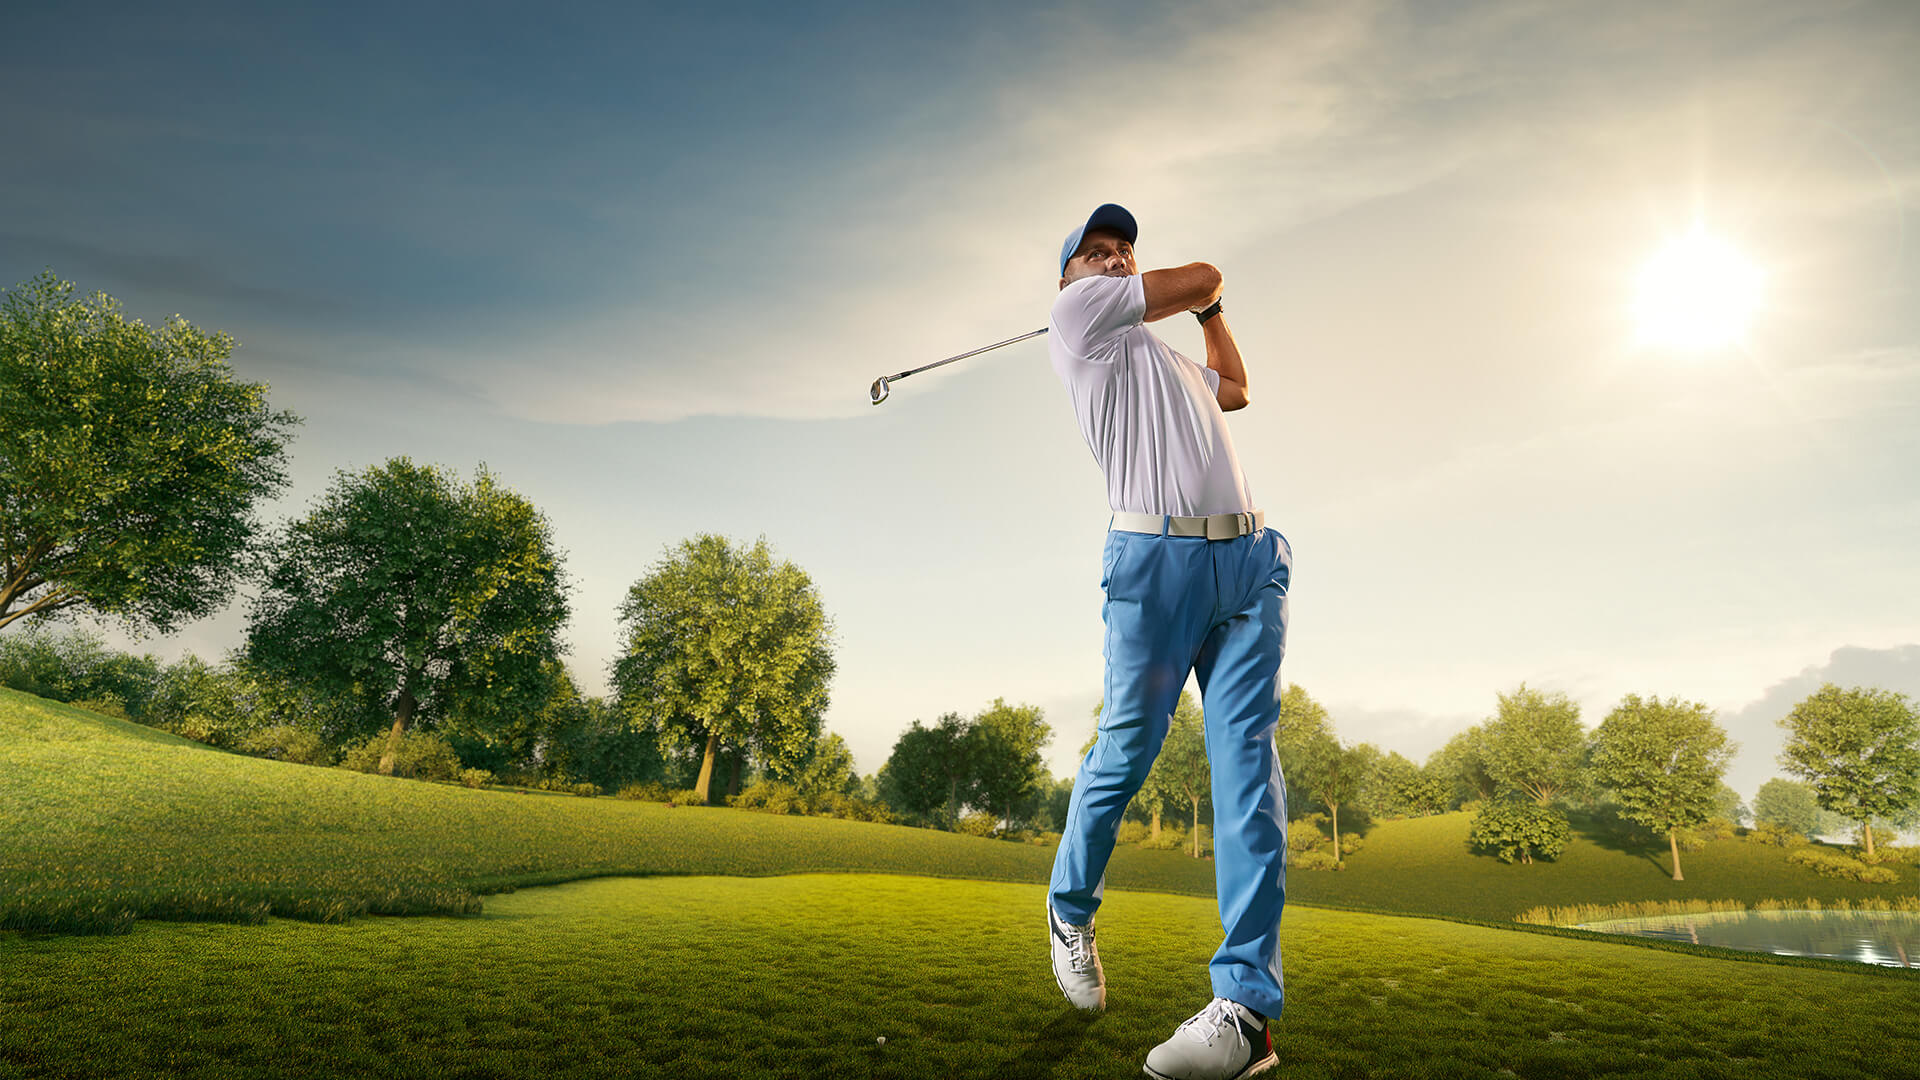 What Business Lessons You Can Learn from Golf? - CEO Monthly